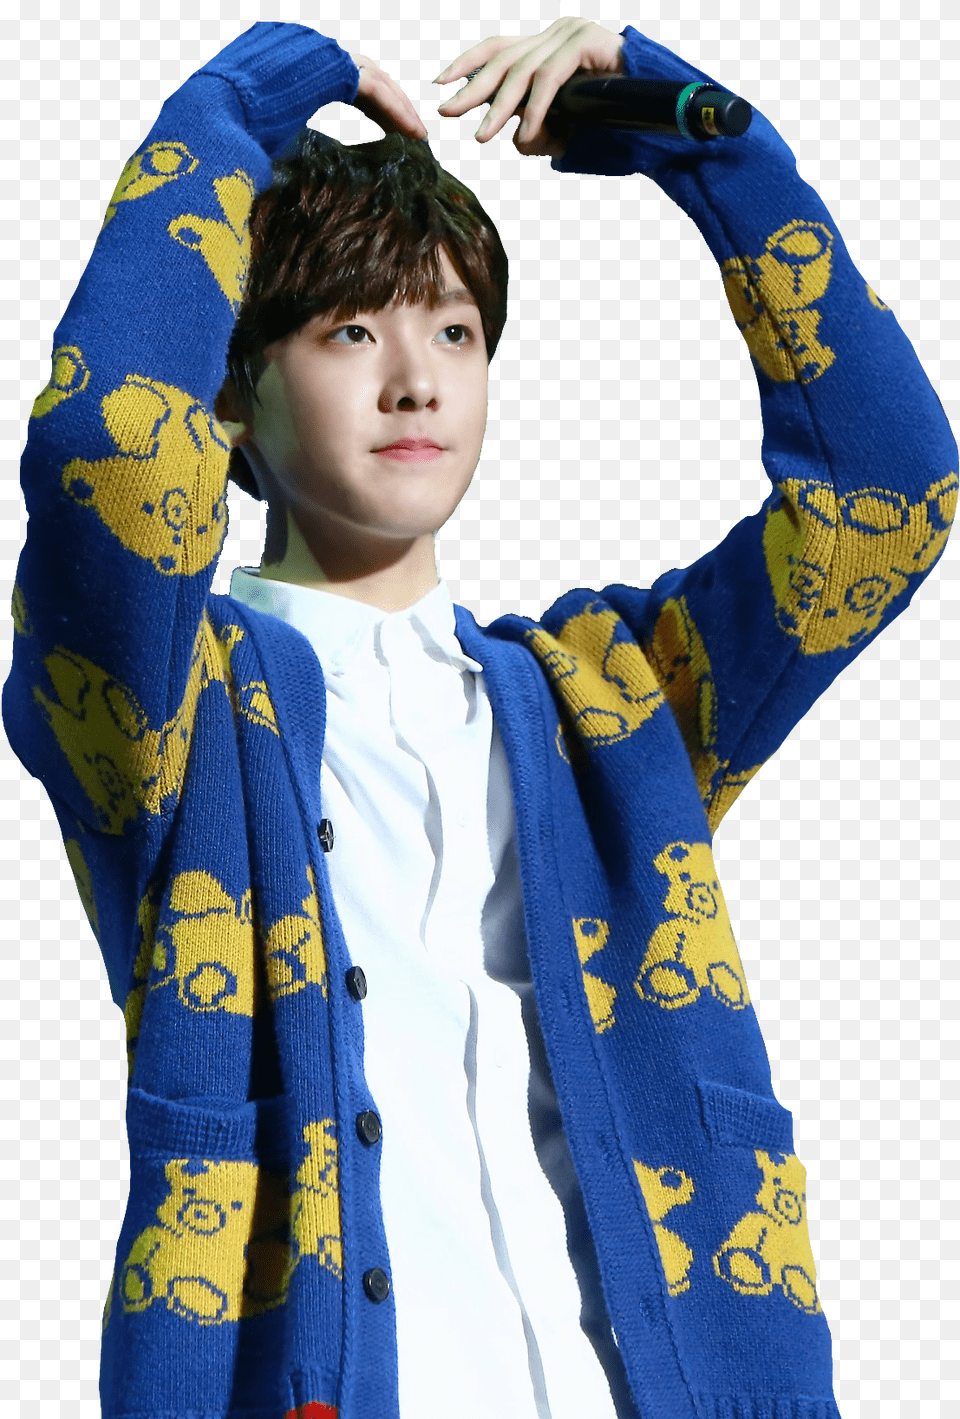 Astro Download Astro Kpop, Sweater, Knitwear, Clothing, Sleeve Png